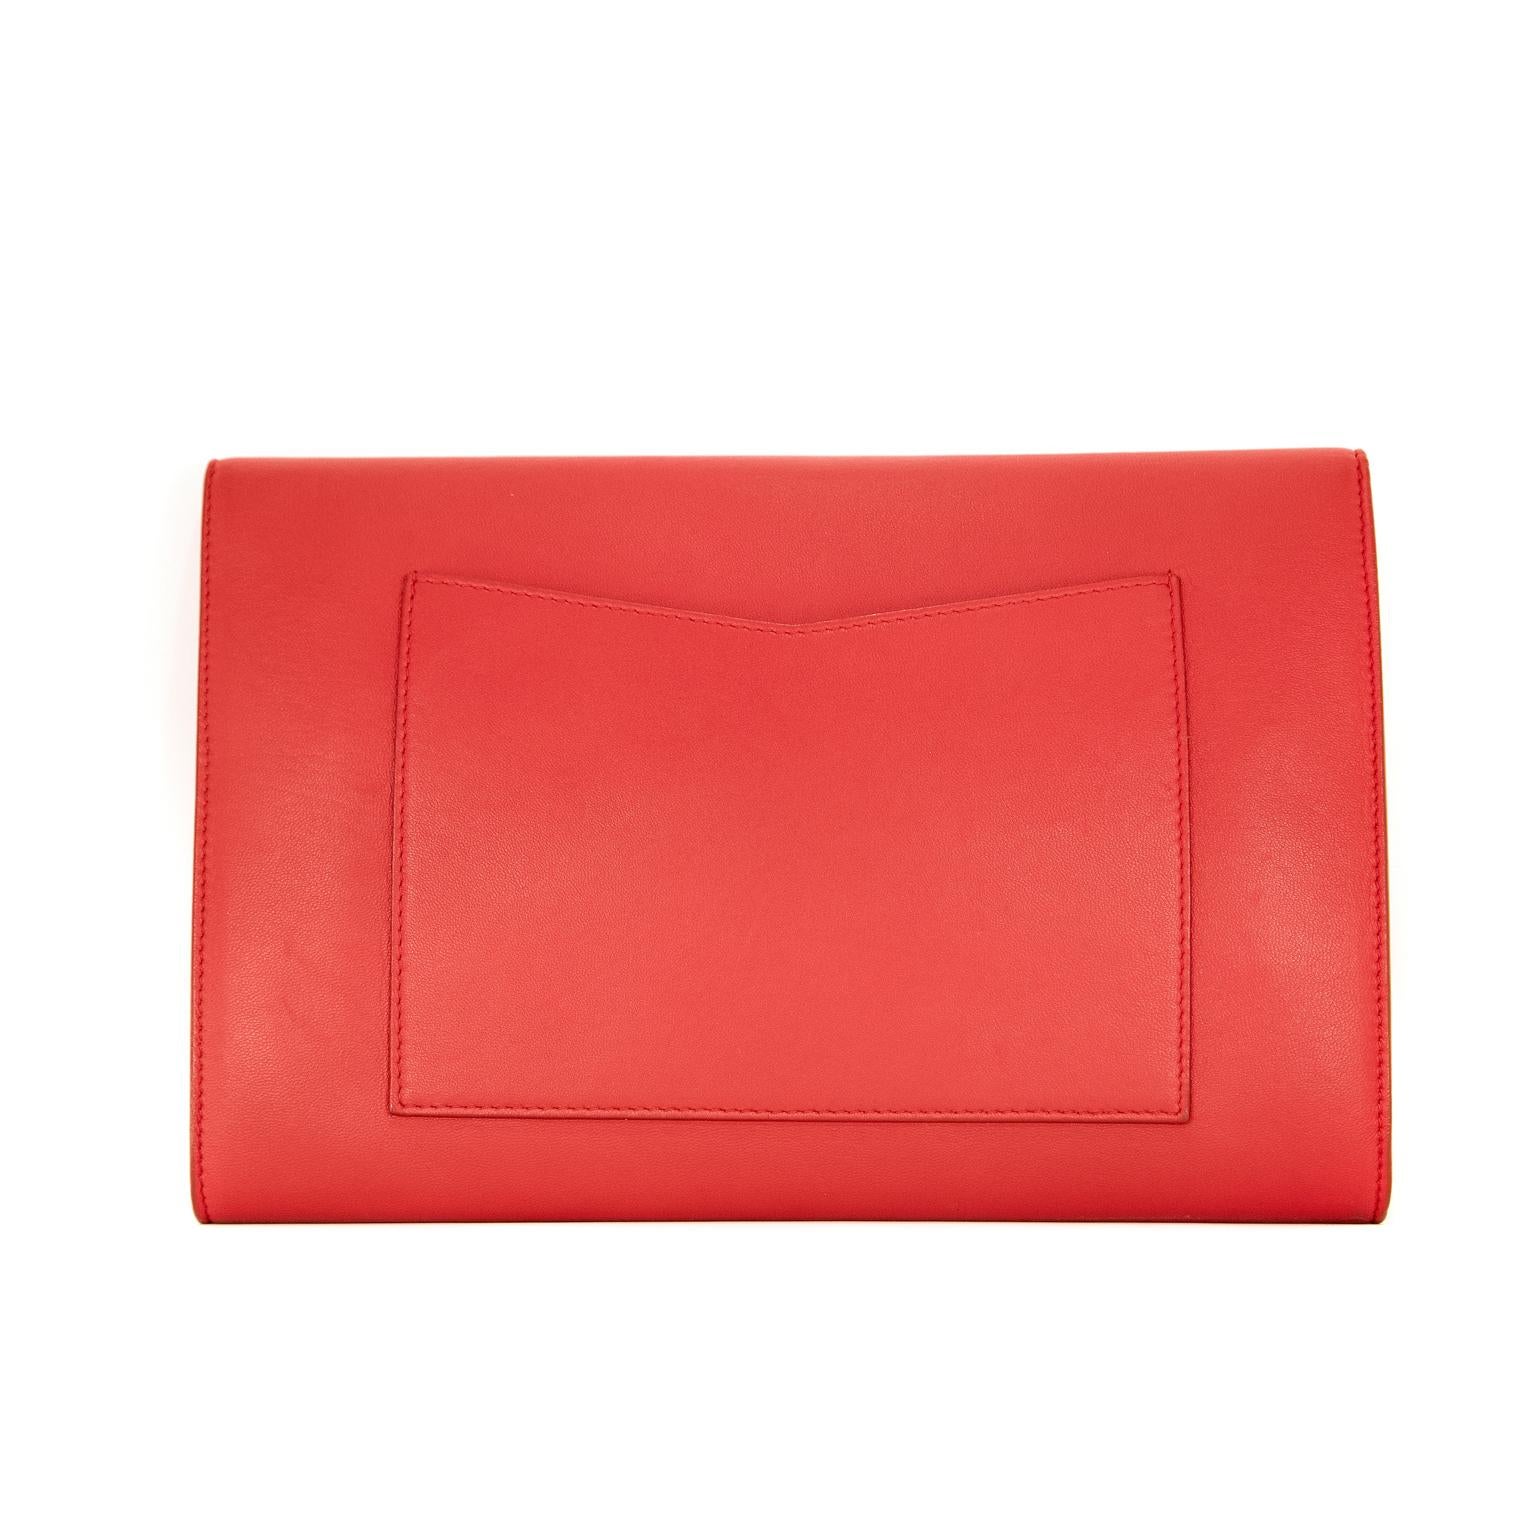 This authentic Chanel Red Lambskin Airlines Envelope Clutch is in excellent condition.  Classic slim clutch with silver hardware and red, white and blue striped accents.   Made in Italy.

Measurements:  10” x 7” x 0.75”  

PBF

